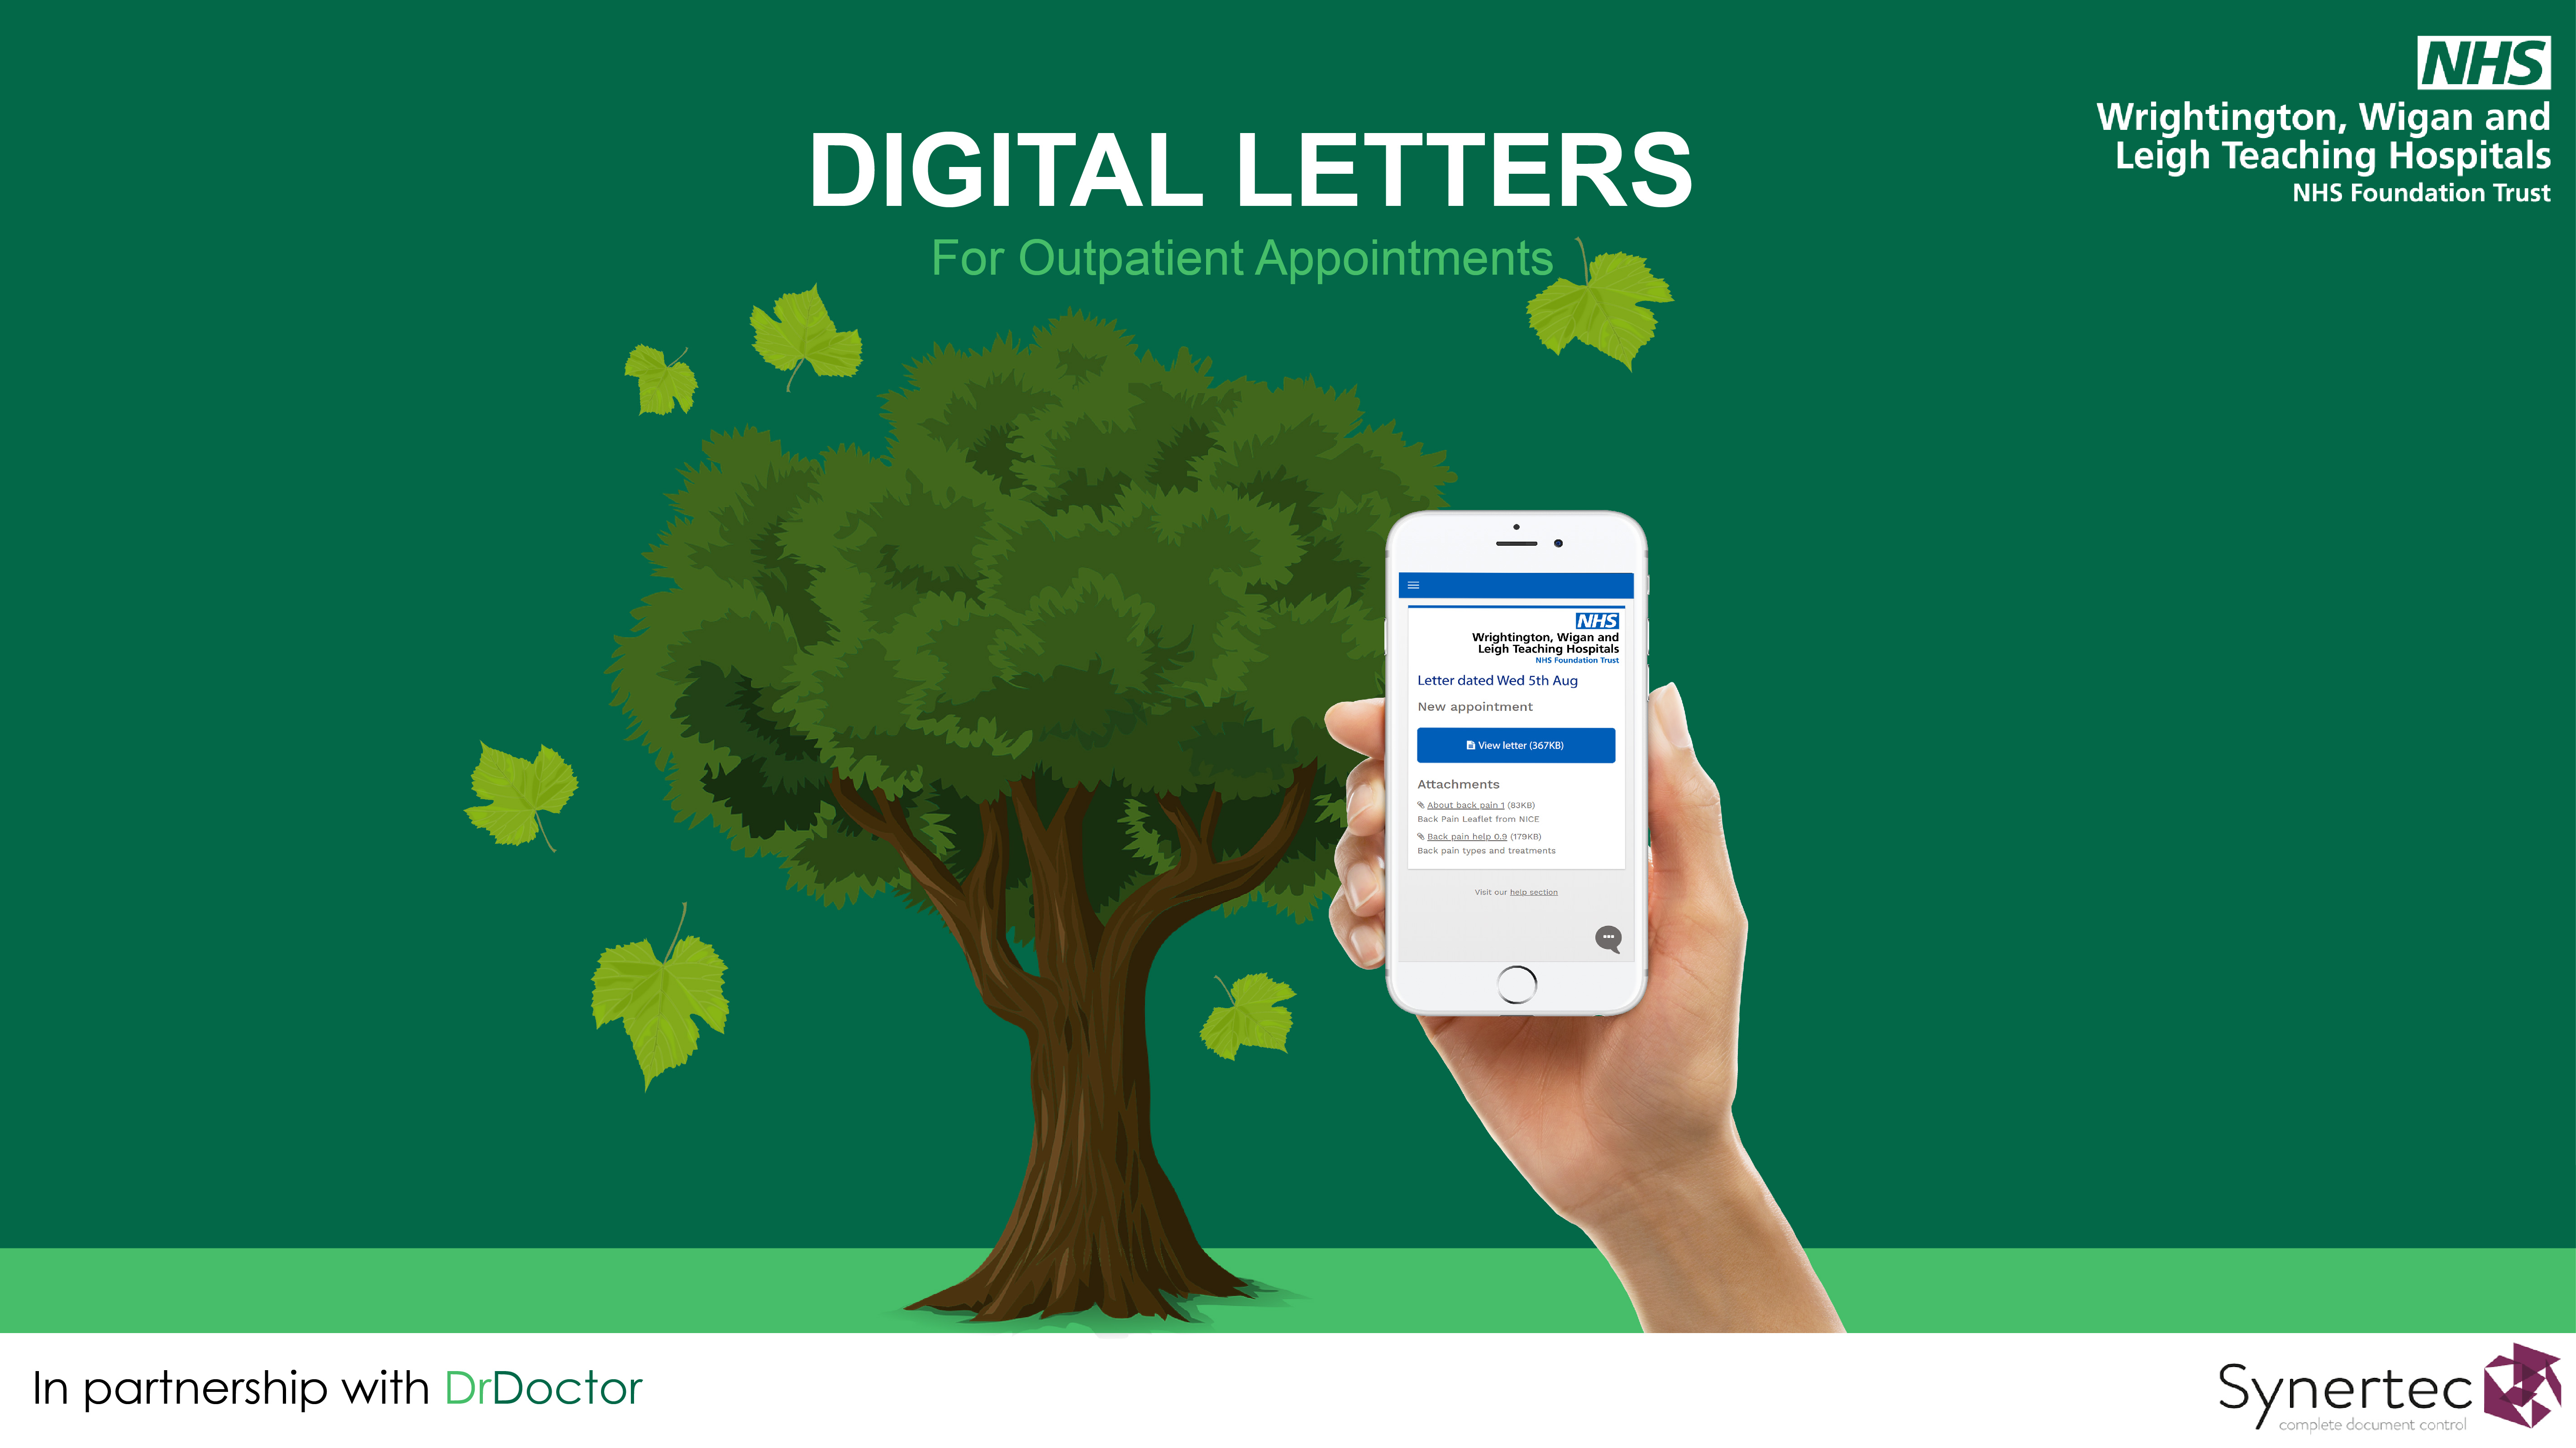 Digital Letters graphic with Tree and WWL NHS Trust logo